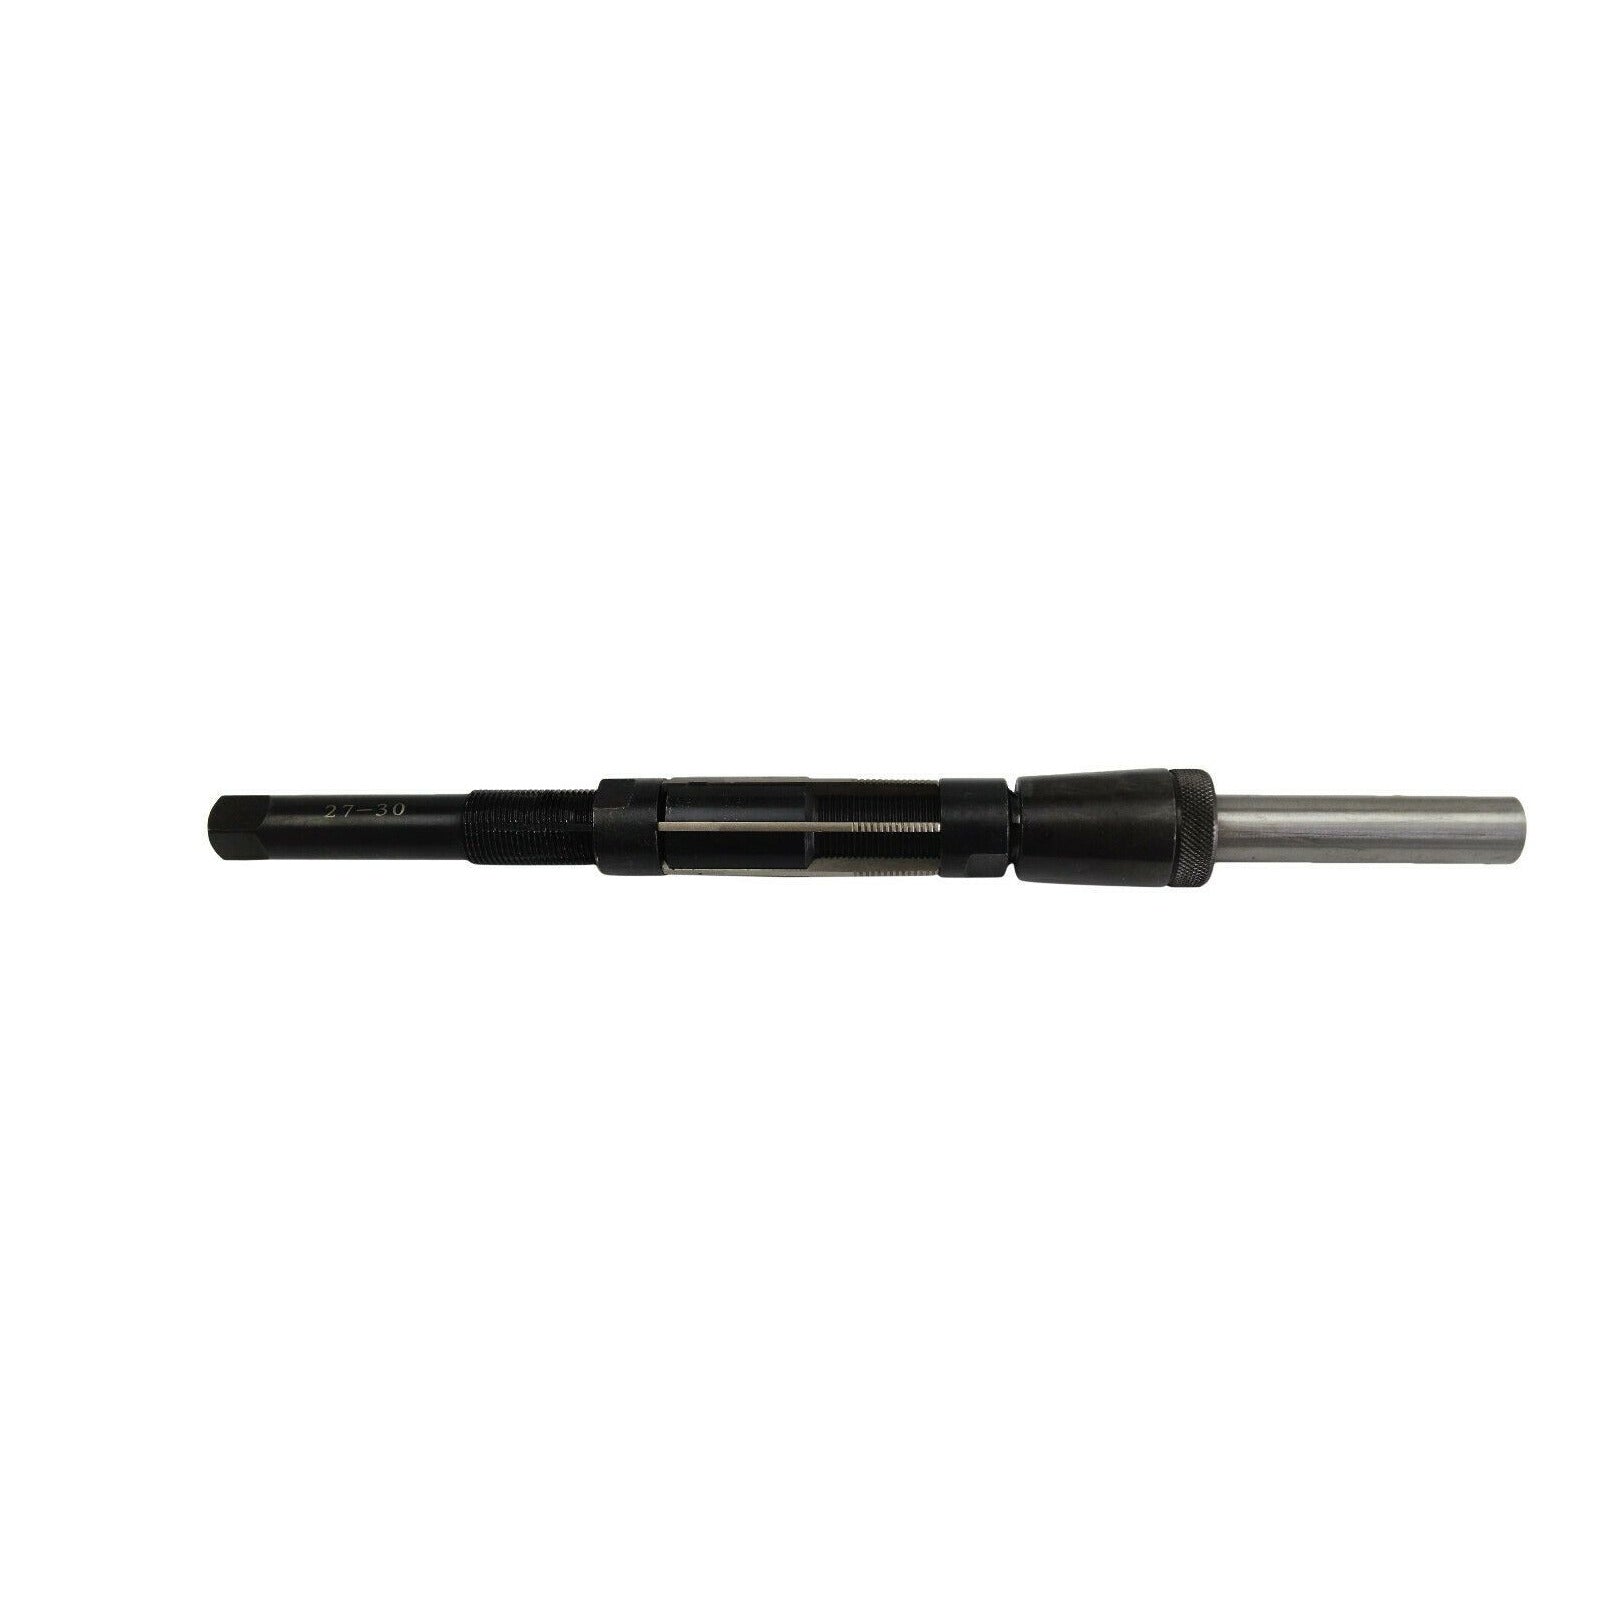 27 - 30mm Adjustable Hand Reamer with Guide